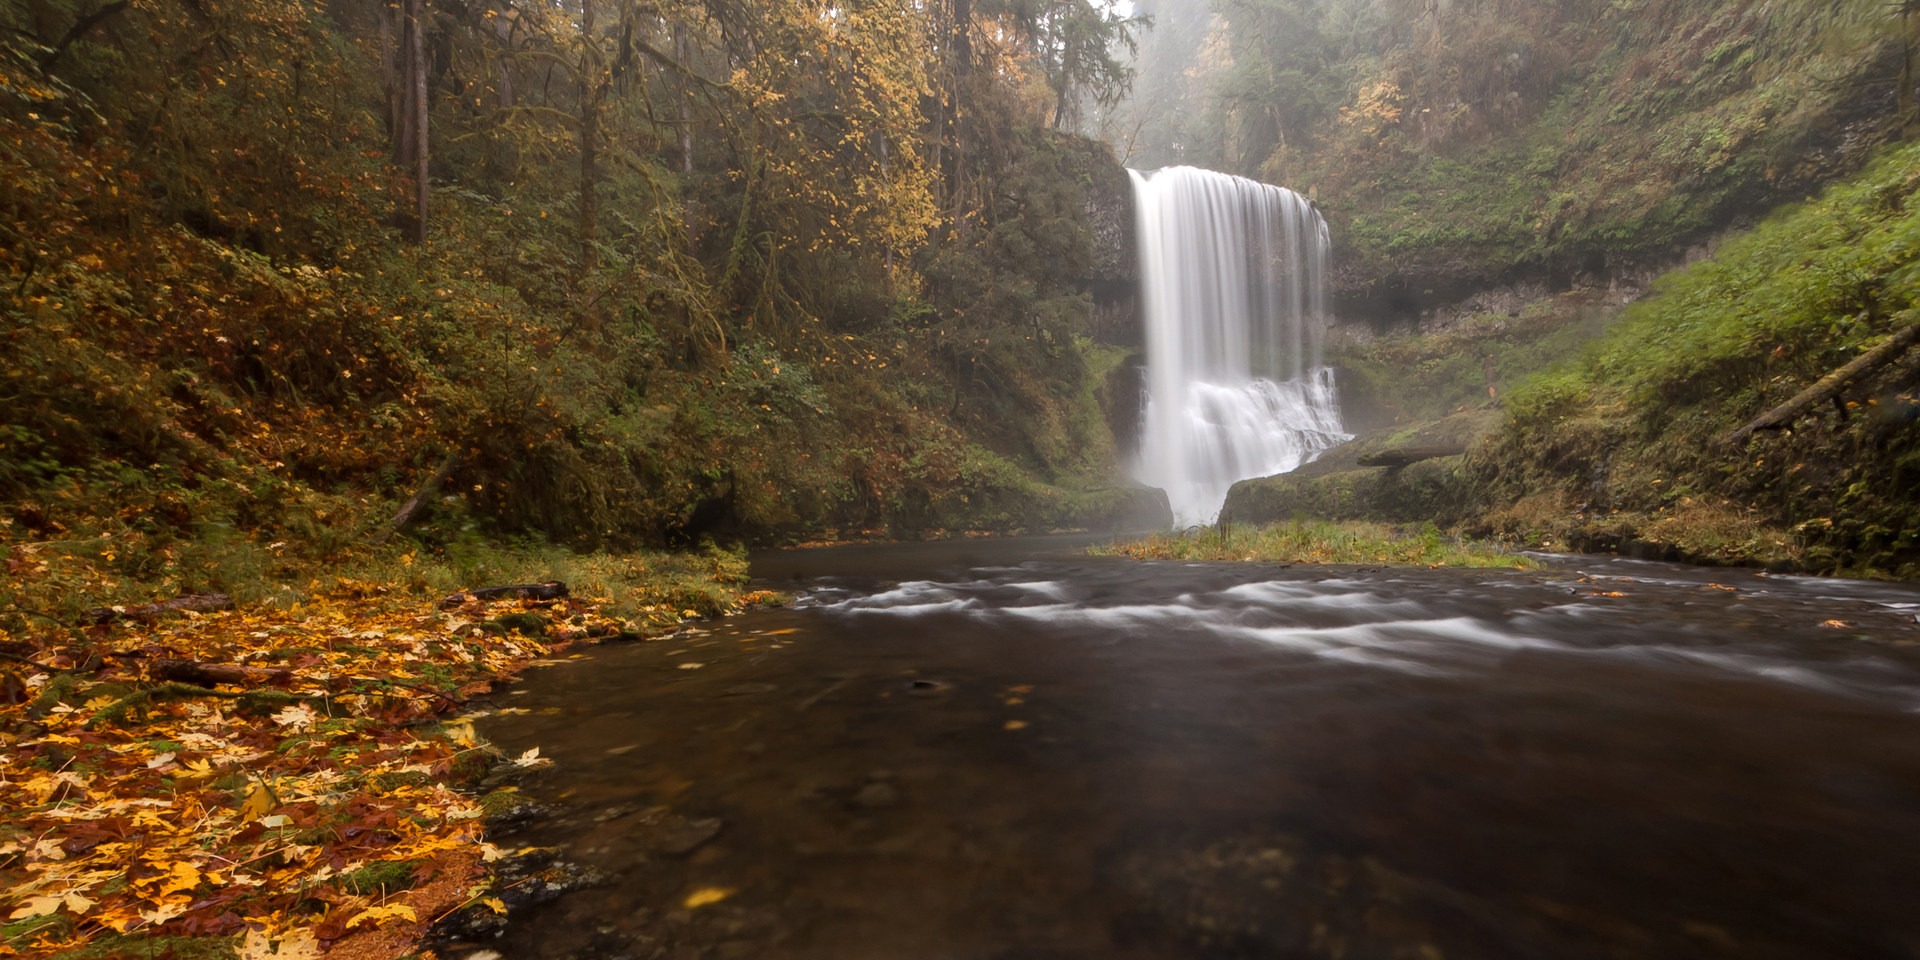 6 Stunning Fall Foliage Hikes in Oregon - Clever Neighbor